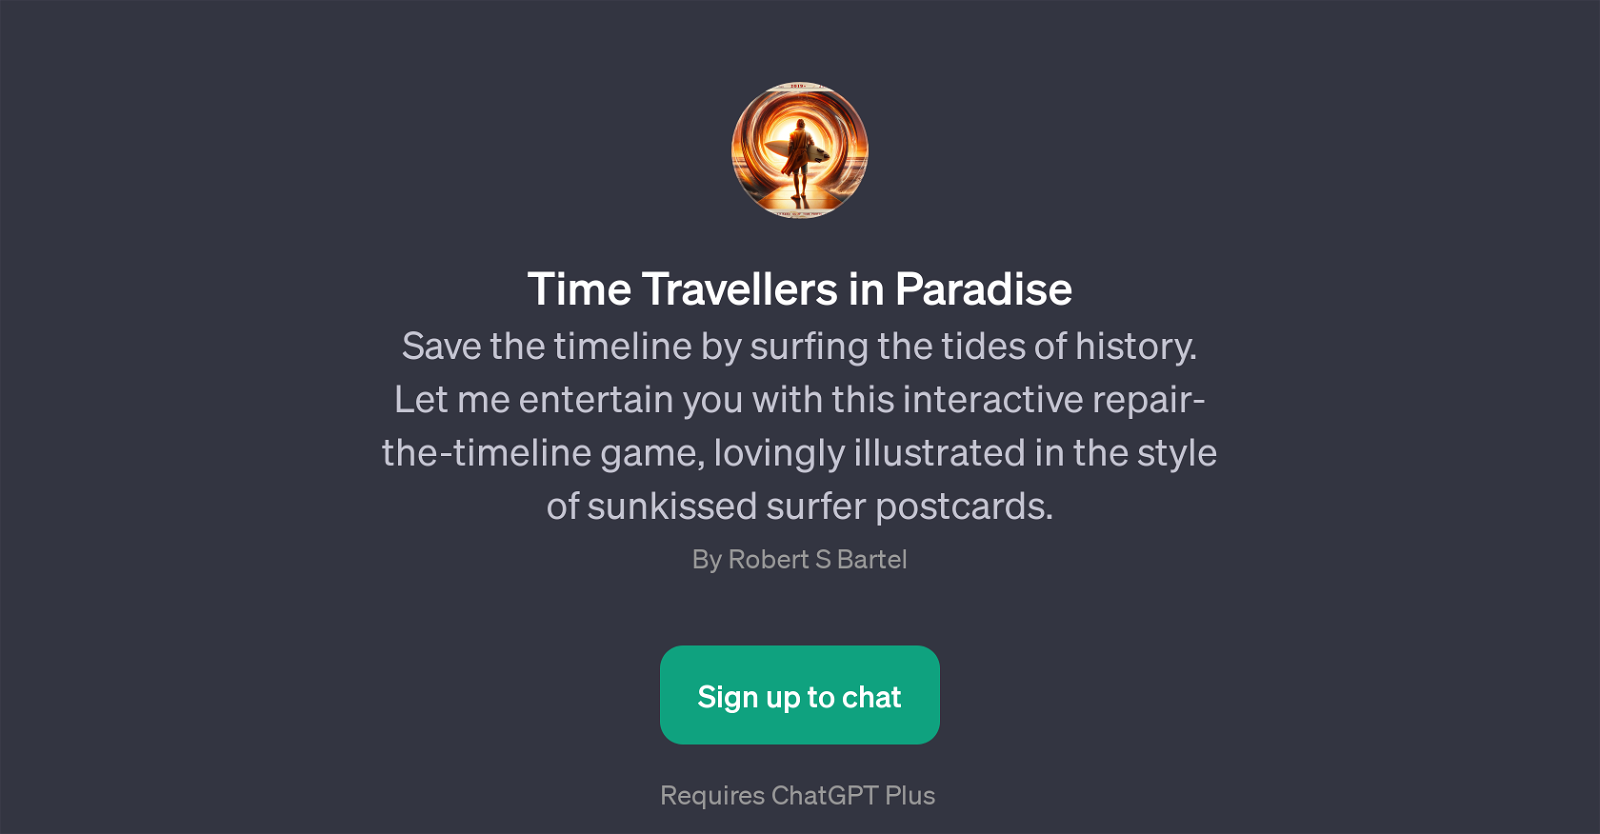 Time Travellers in Paradise website